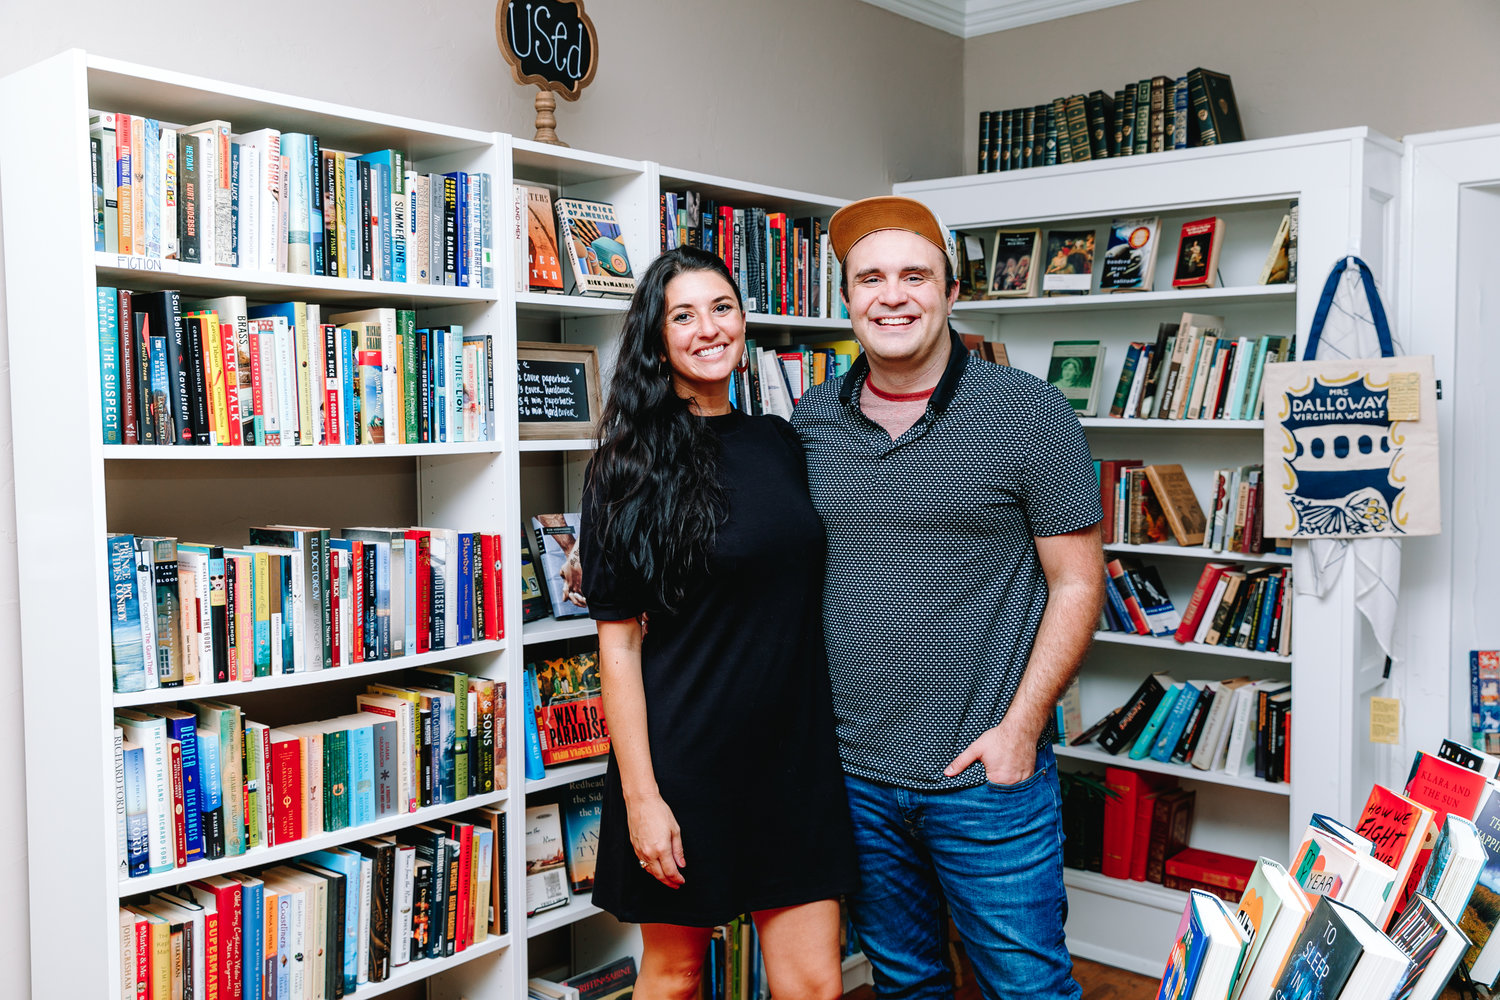 FULL OF WORDS: Pagination Bookshop co-owners Jennifer Murvin and Kory Cooper estimate their Walnut Street store holds roughly 4,000 books.